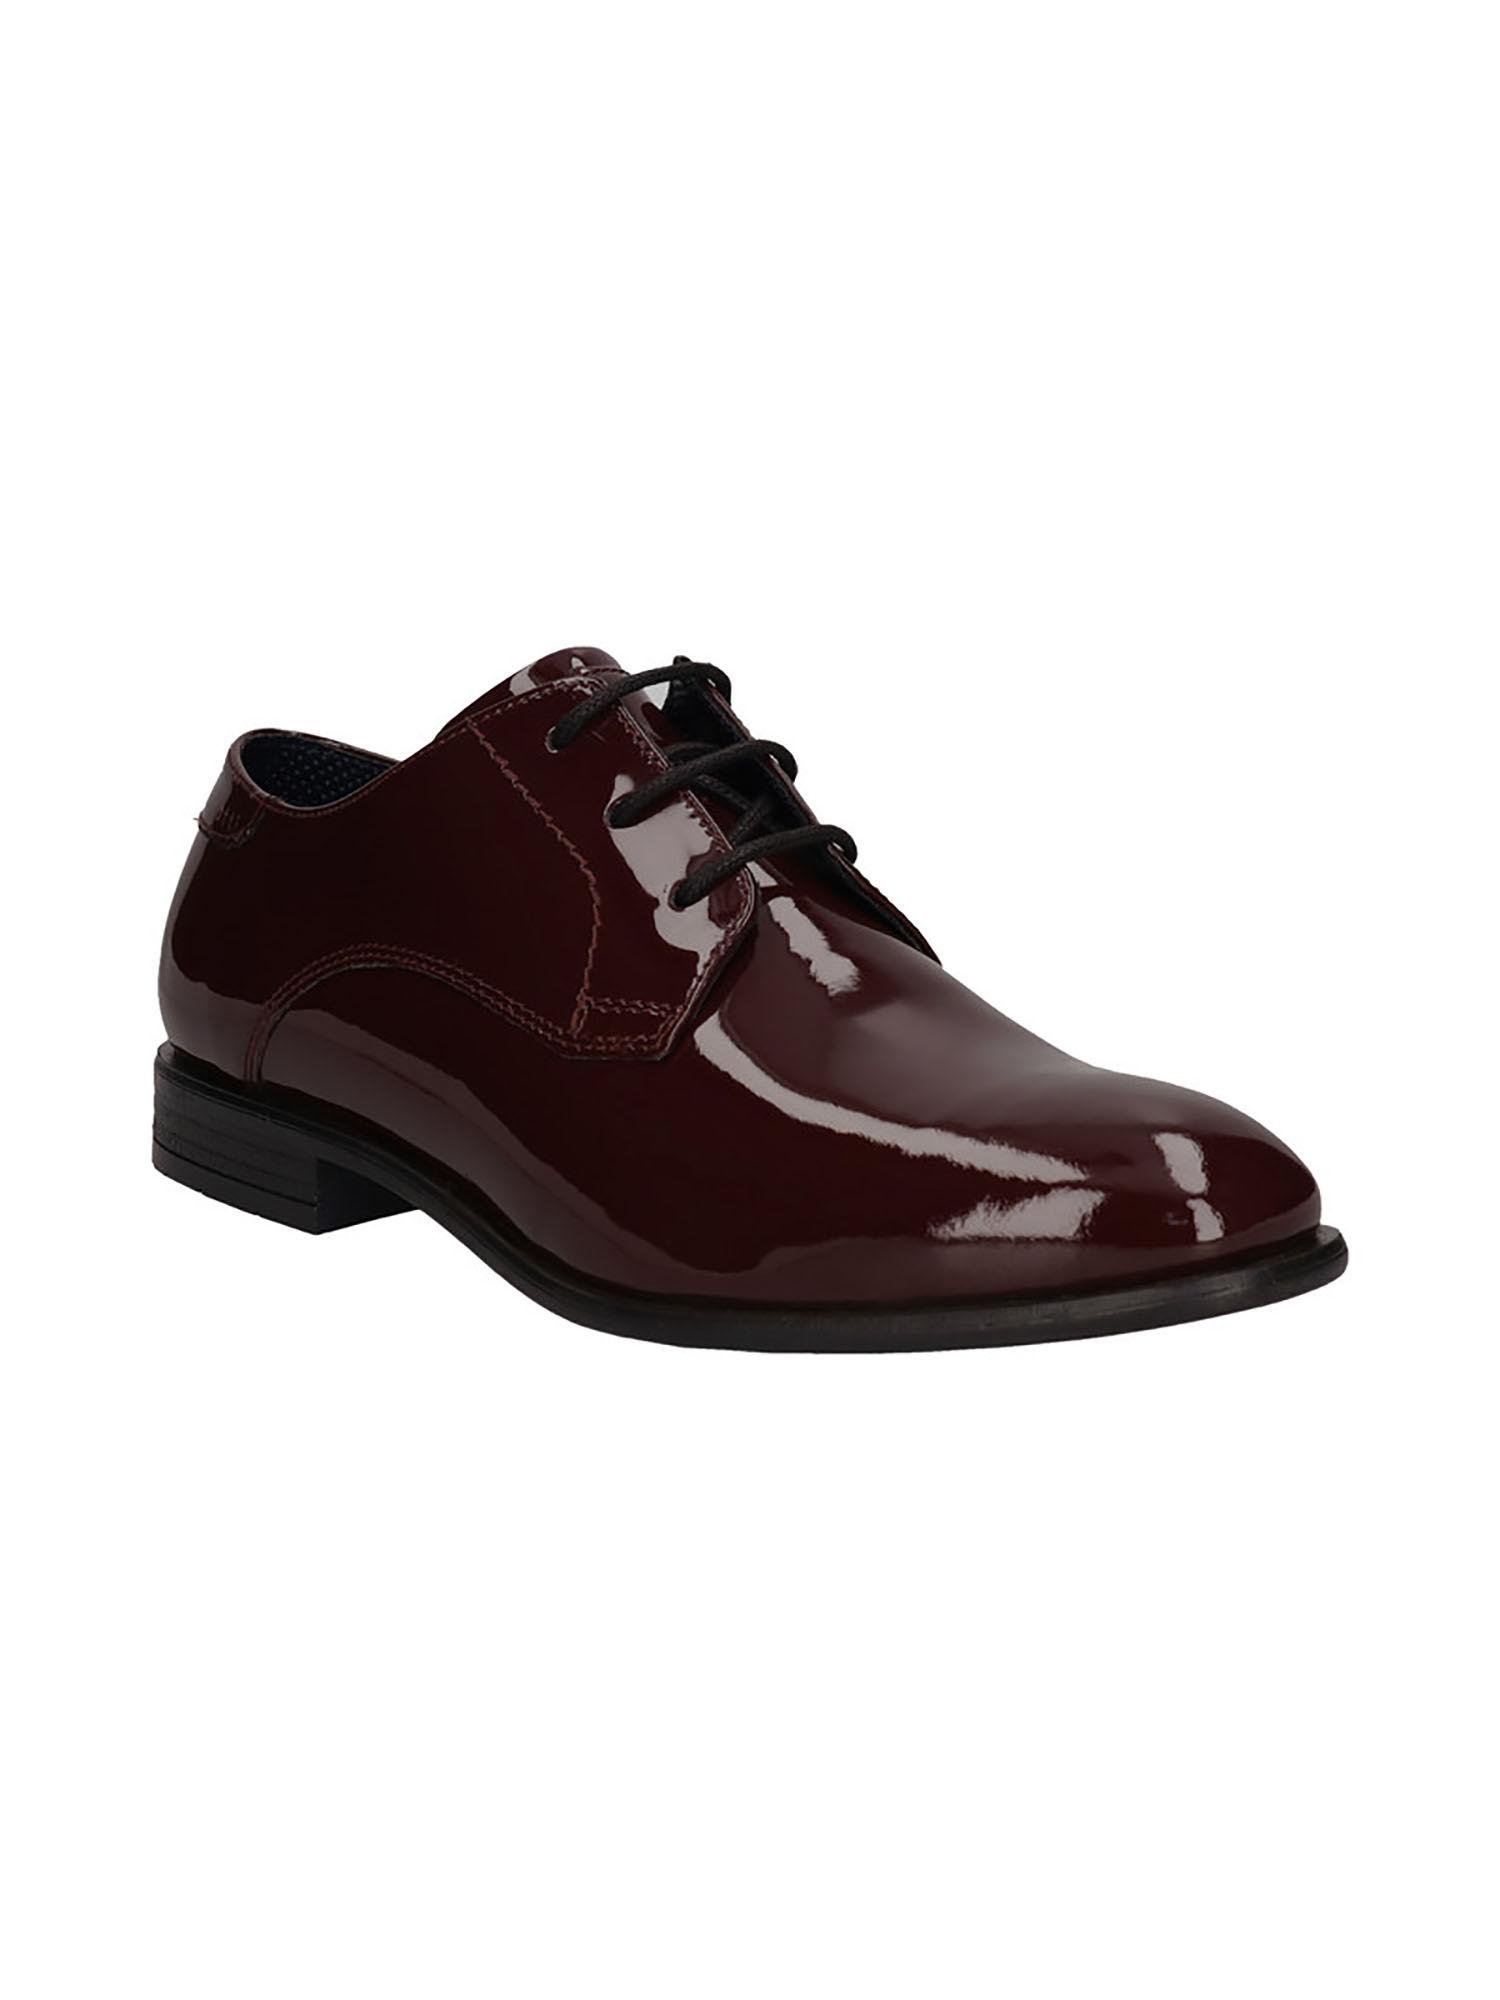 lero comfort maroon leather mens derby shoes